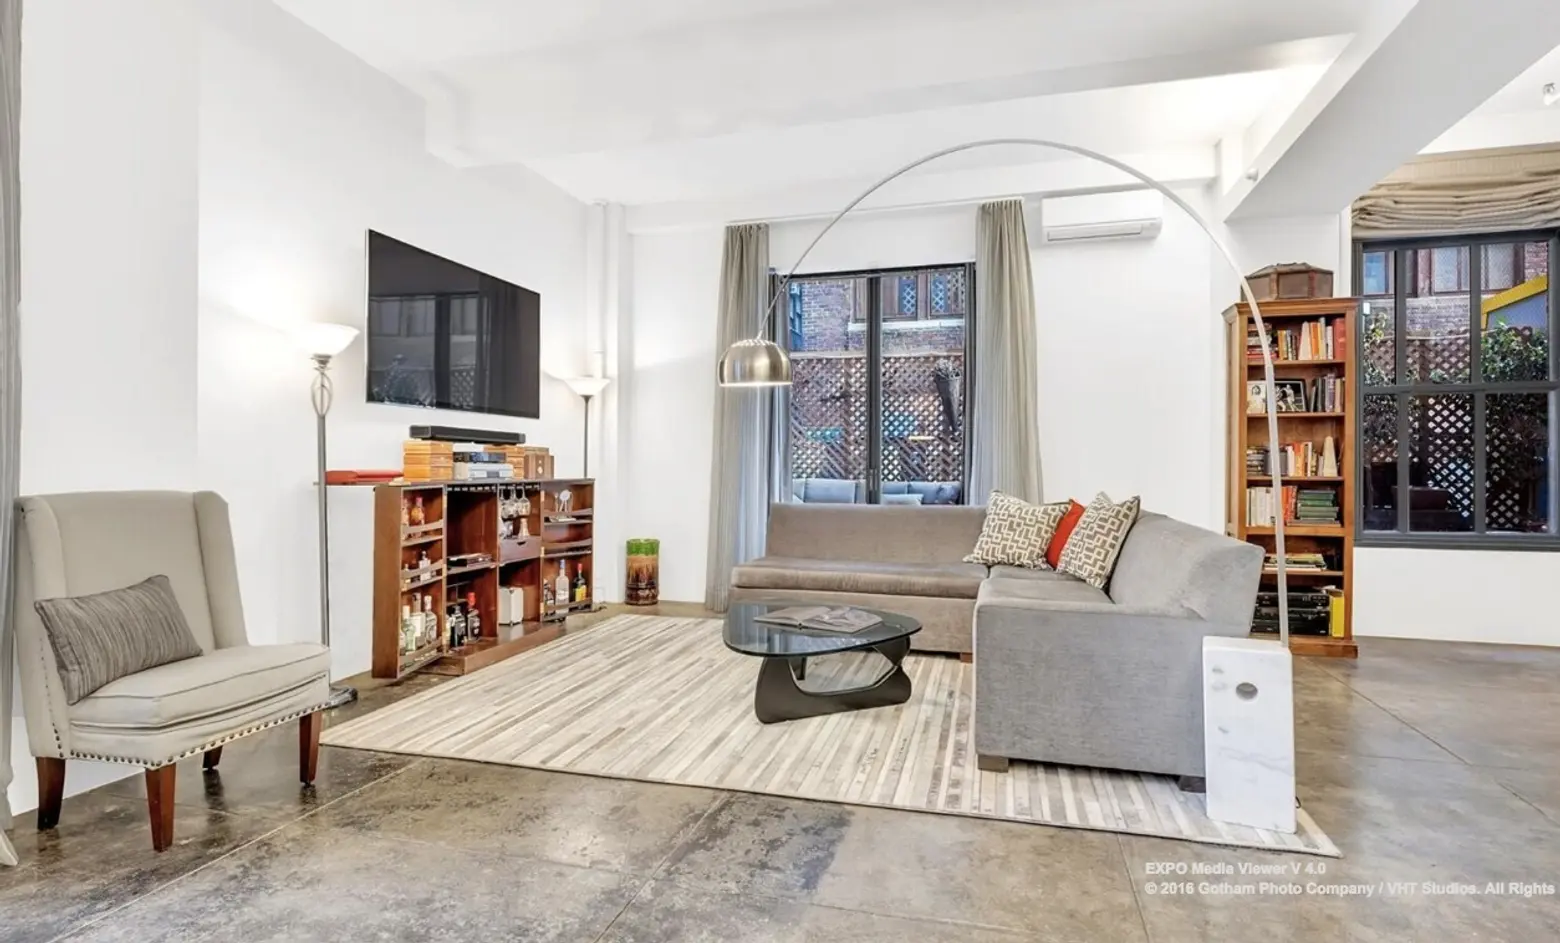 249 West 29th Street, loft, living room, chelsea, SYSTEMarchitects